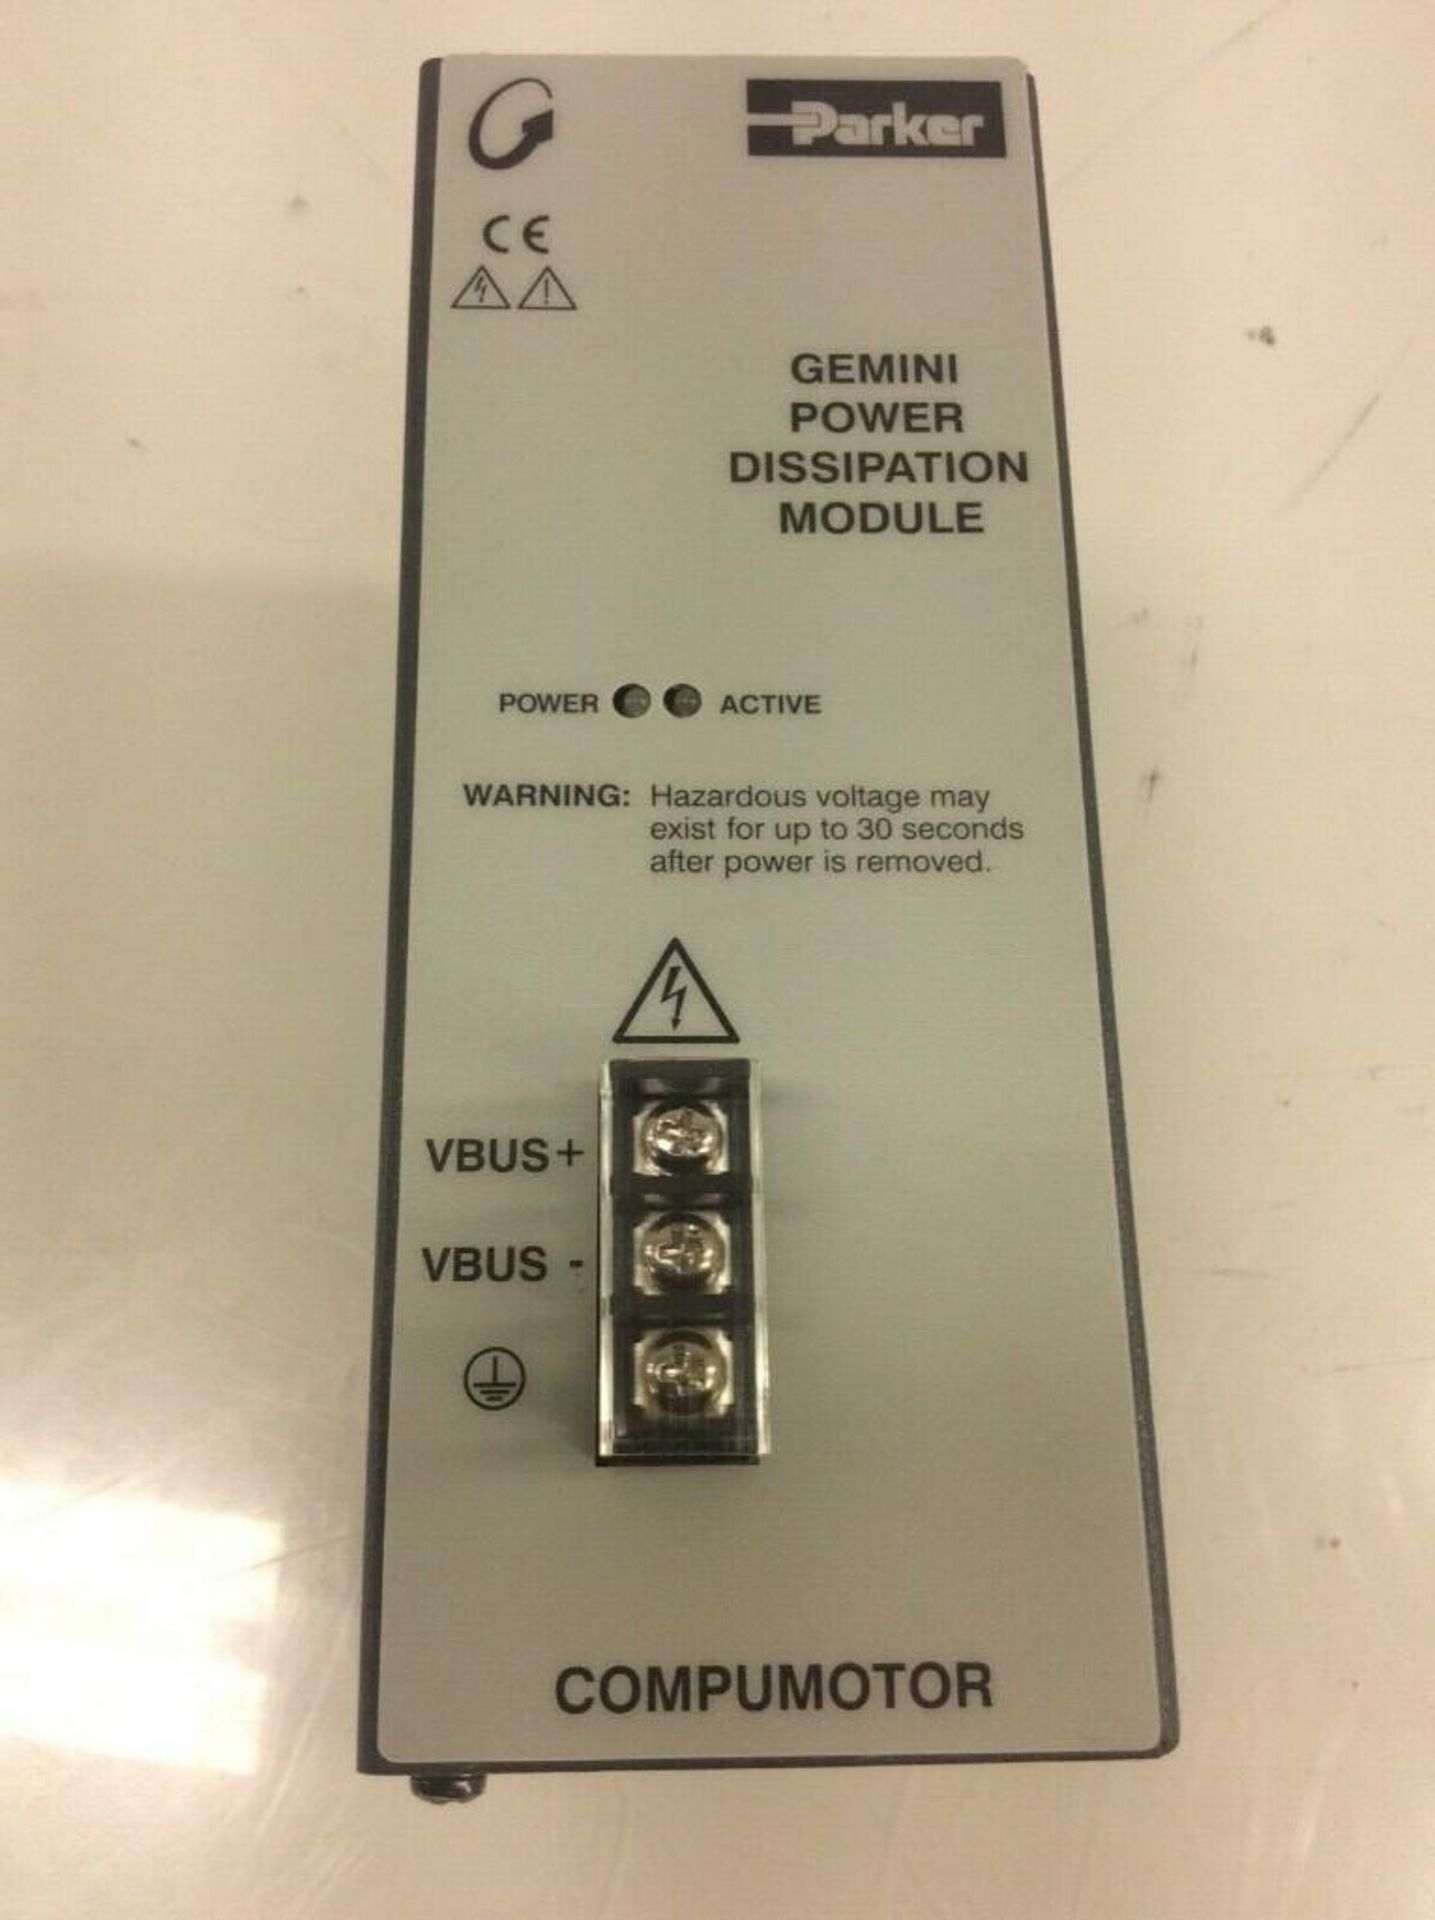 Lot of (3) Parker Compumotor Gemini Power Dissipation Modules GPDM-12254 - Image 2 of 5